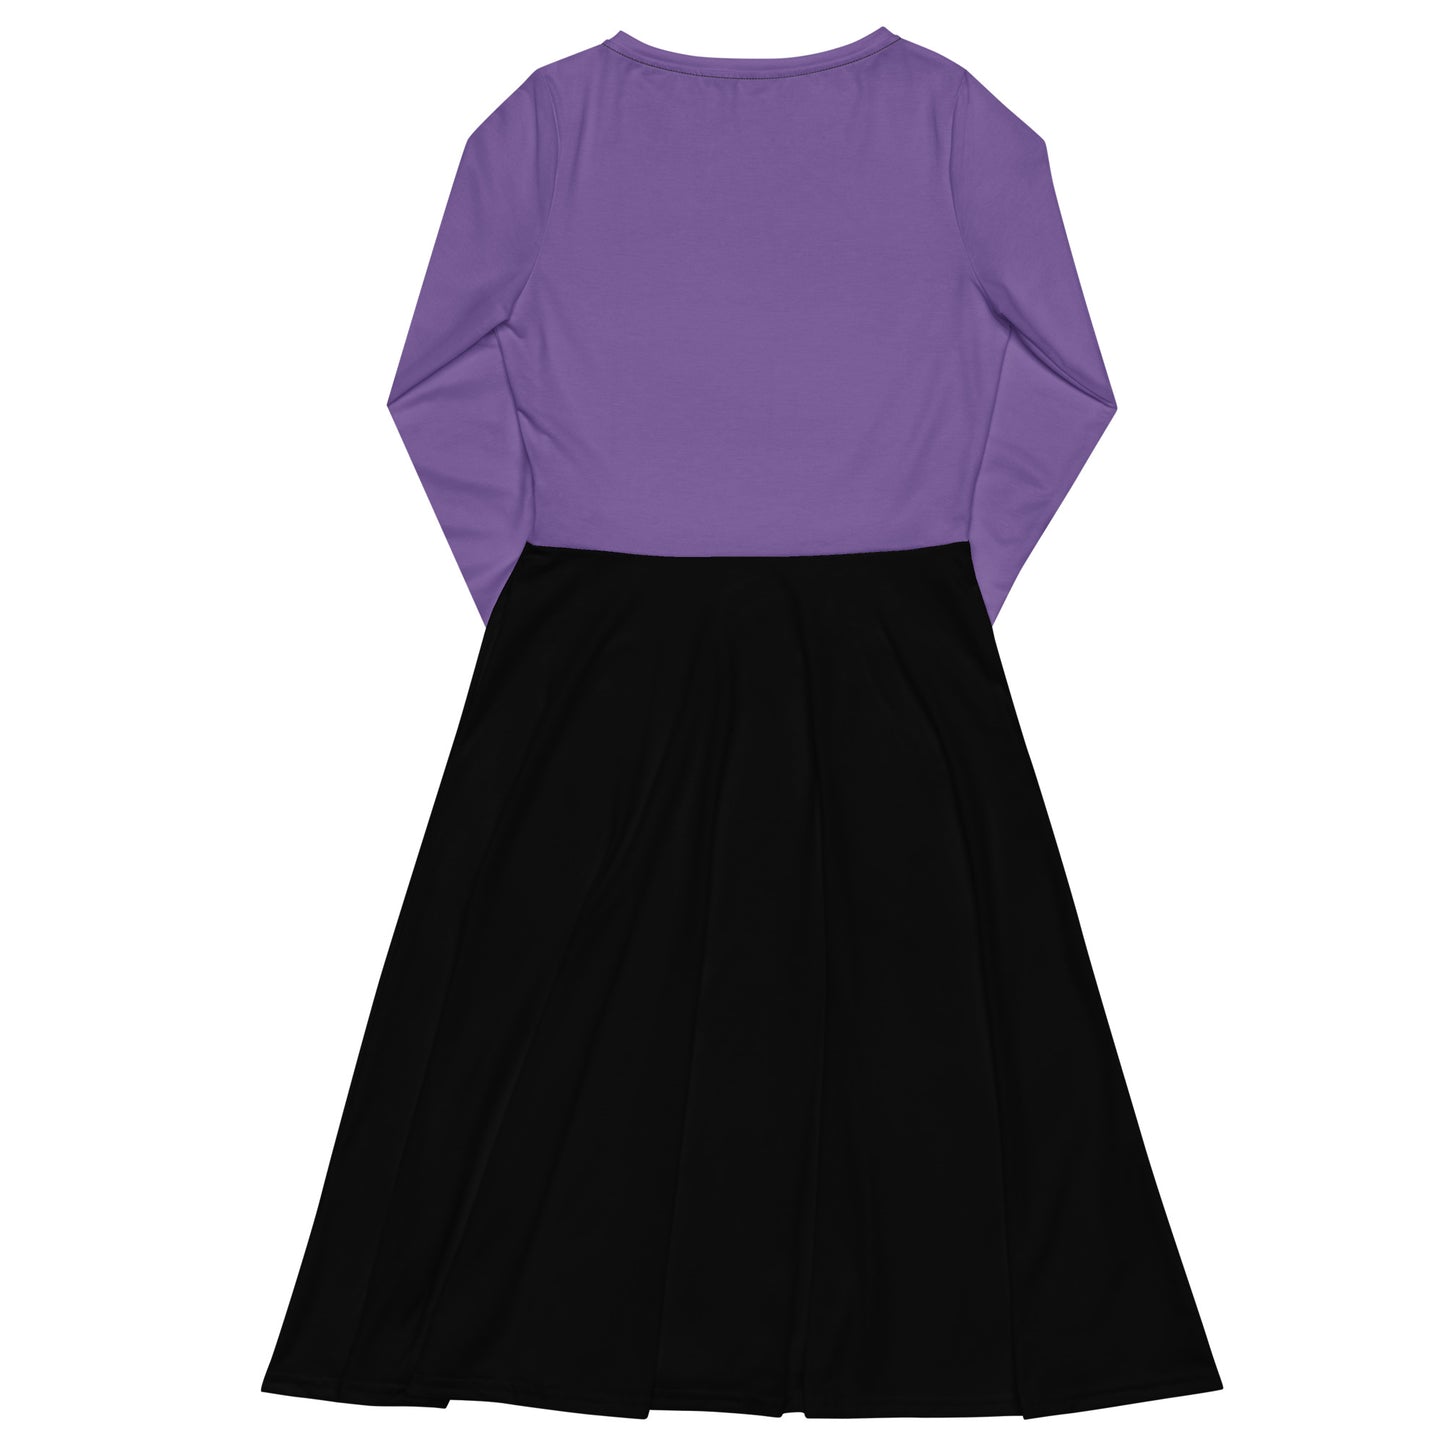 Long-Sleeve Midi Dress: Drink Up Witches (black and ce soir purple)